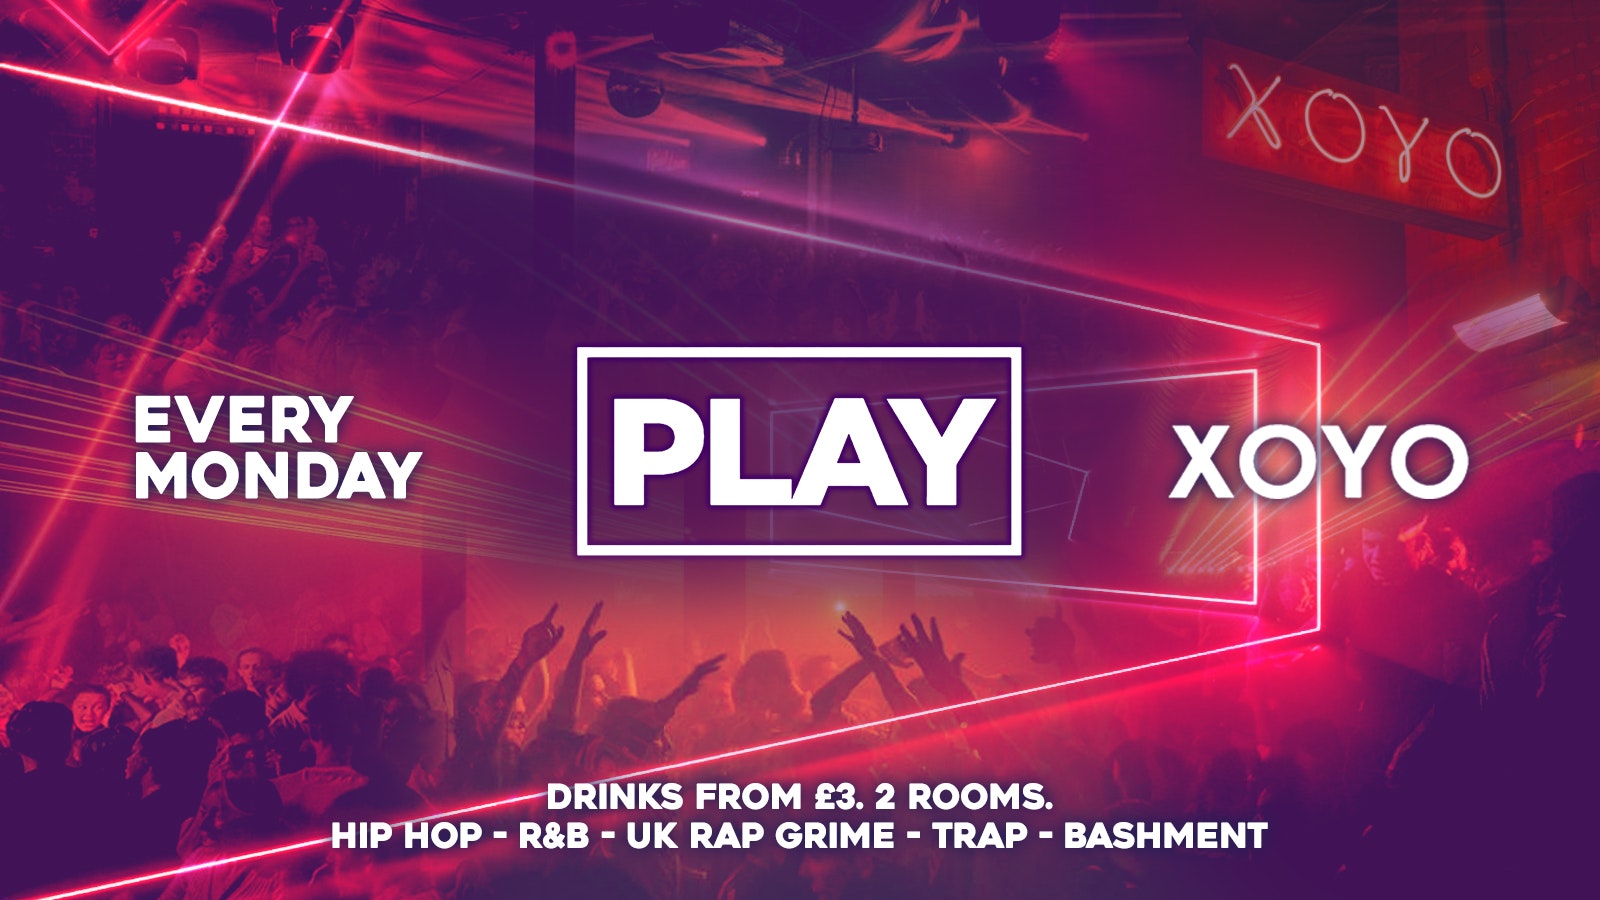 Play @ XOYO – The Biggest Weekly Monday Student Night in London! – 18th July 2022 🔥